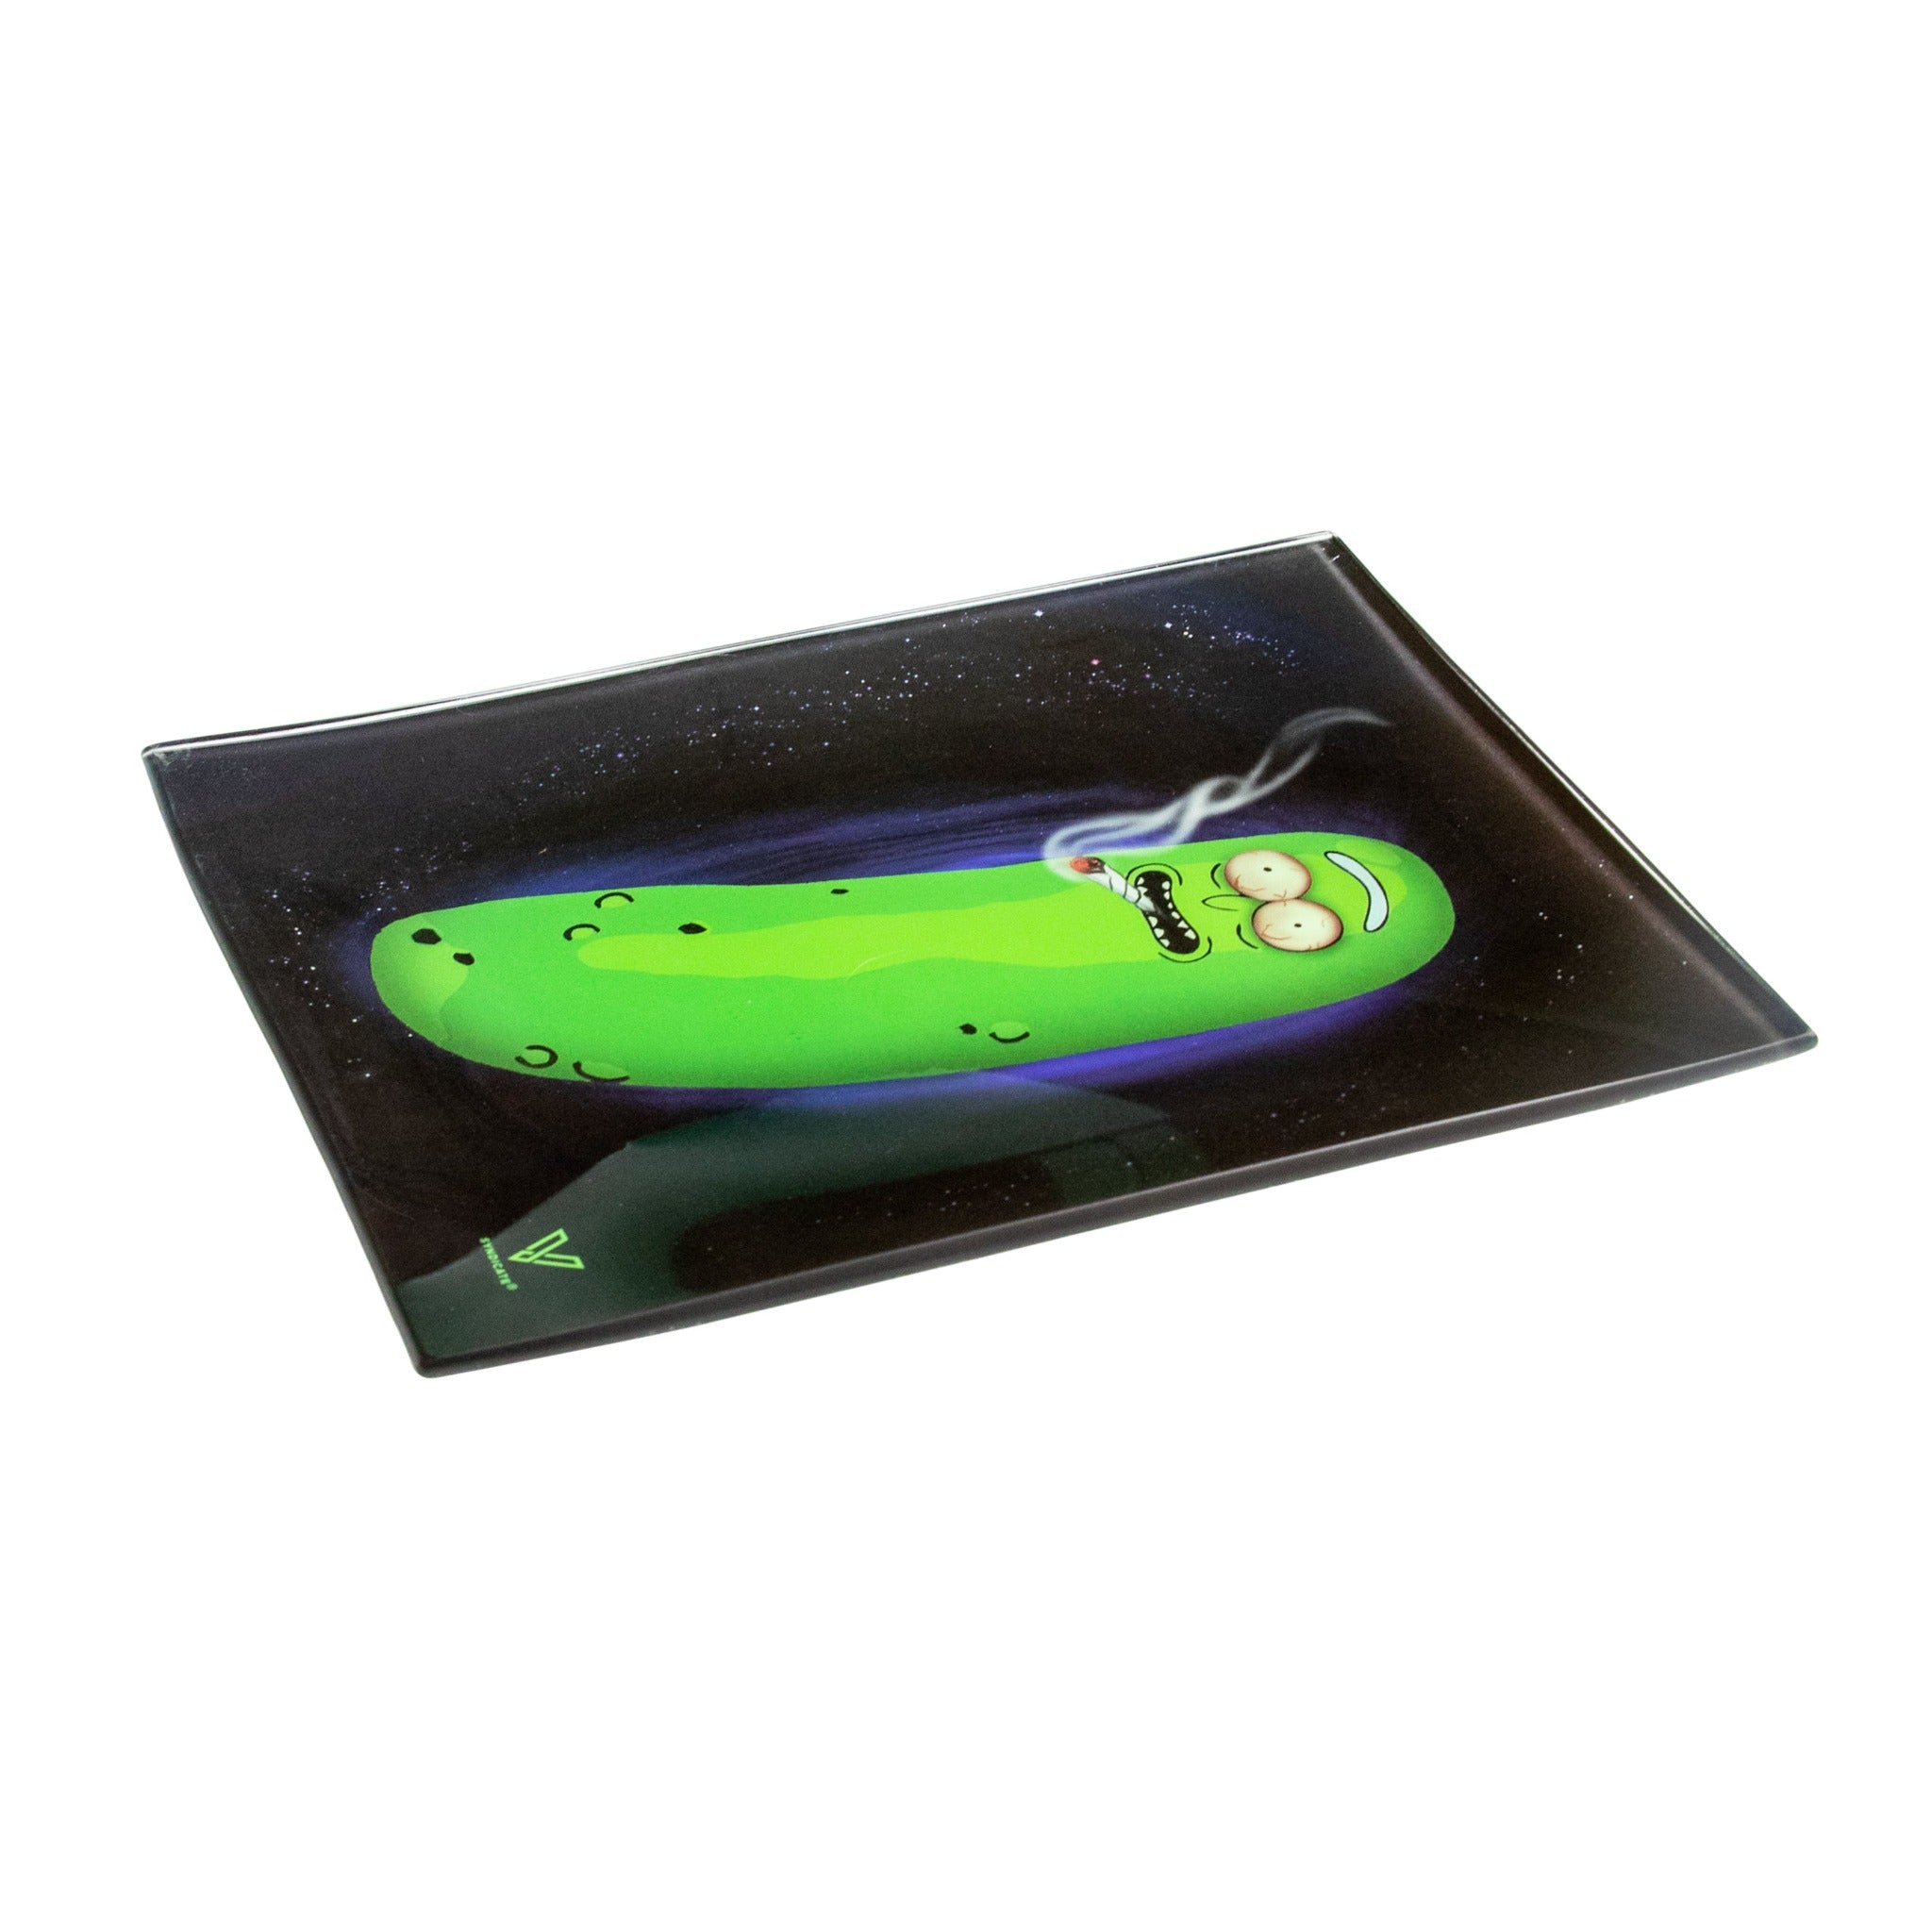 V Syndicate Pickle Glass Rolling Tray Rolling Tray VS 